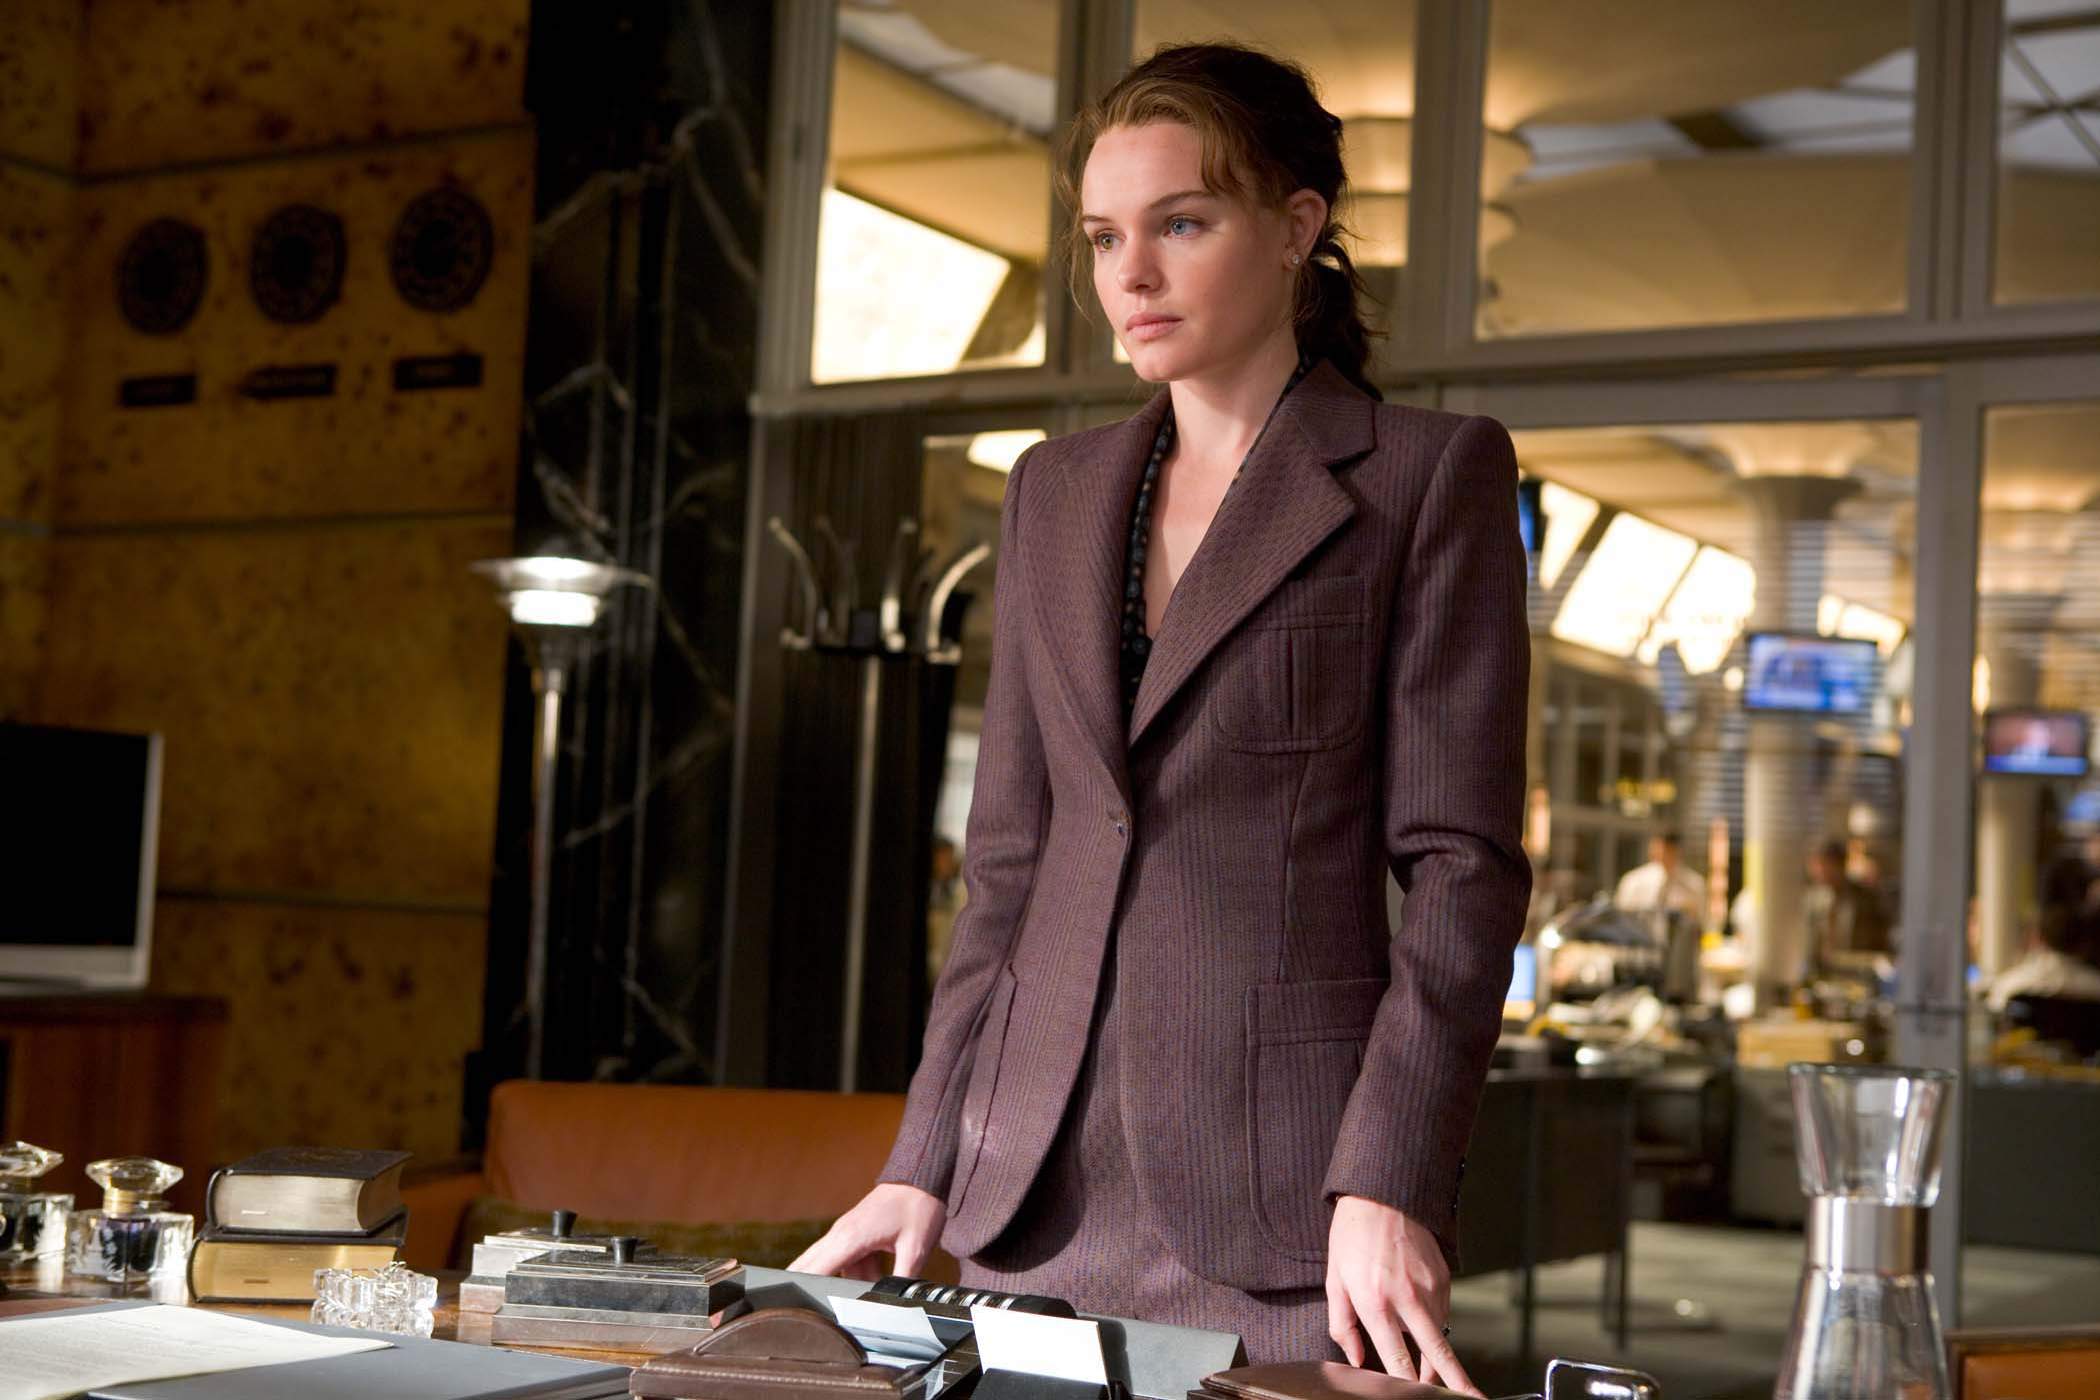 KATE BOSWORTH stars as Lois Lane in a scene from Warner Bros Pictures' Superman Returns (2006)